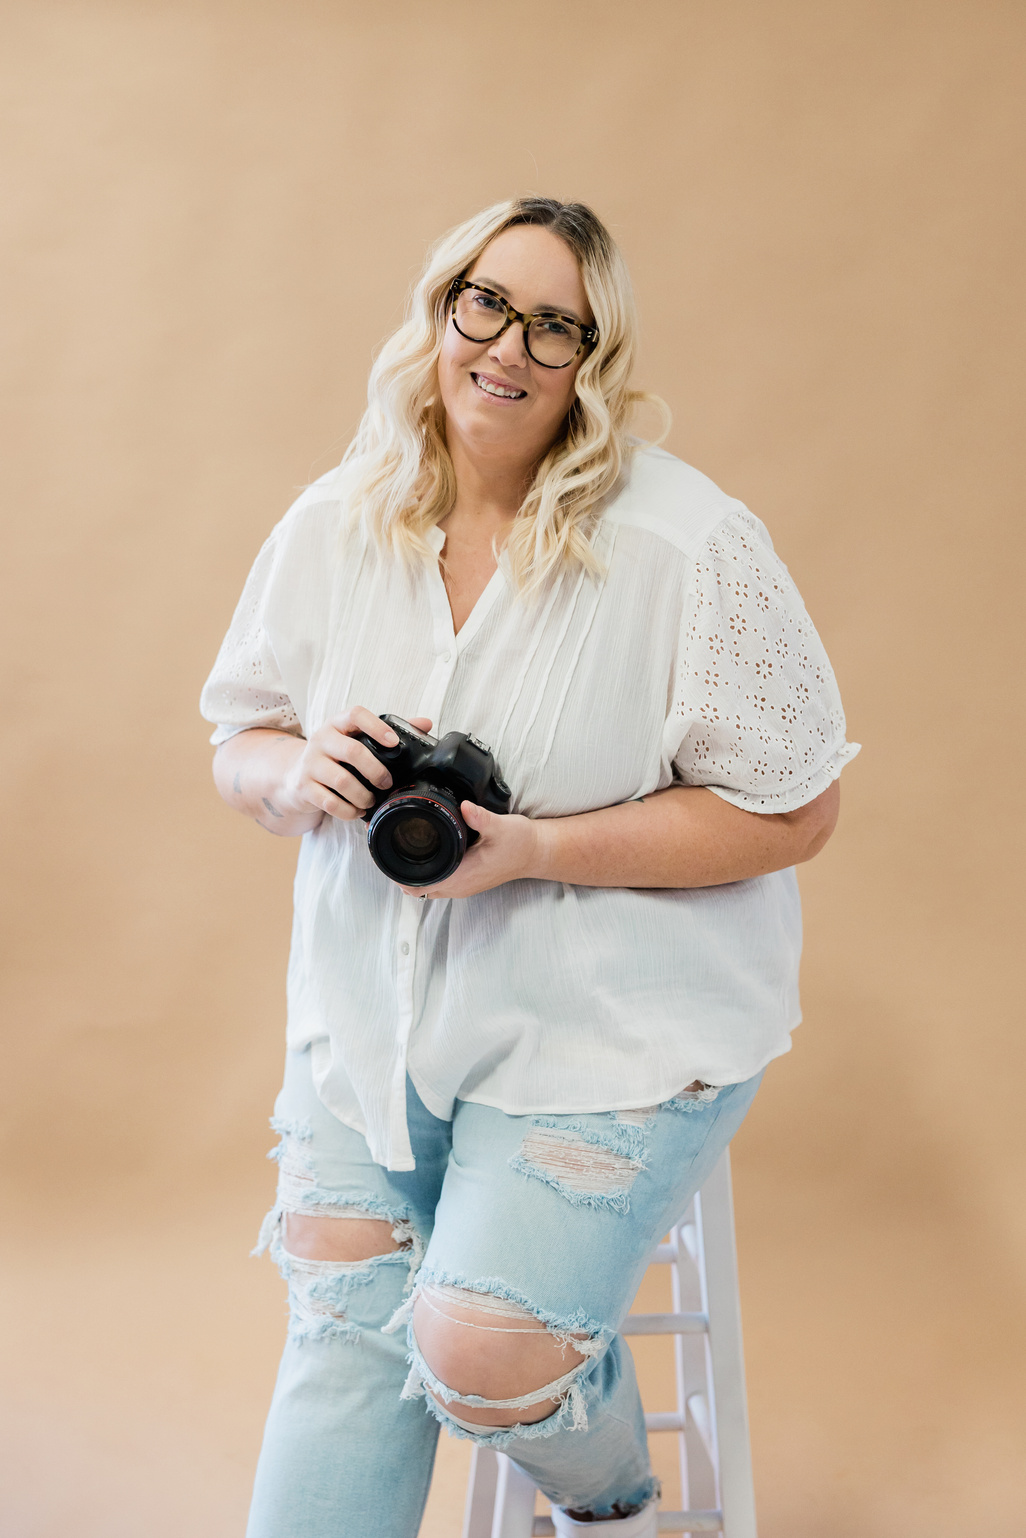 Female Photographer Holding a Professional Camera in Studio